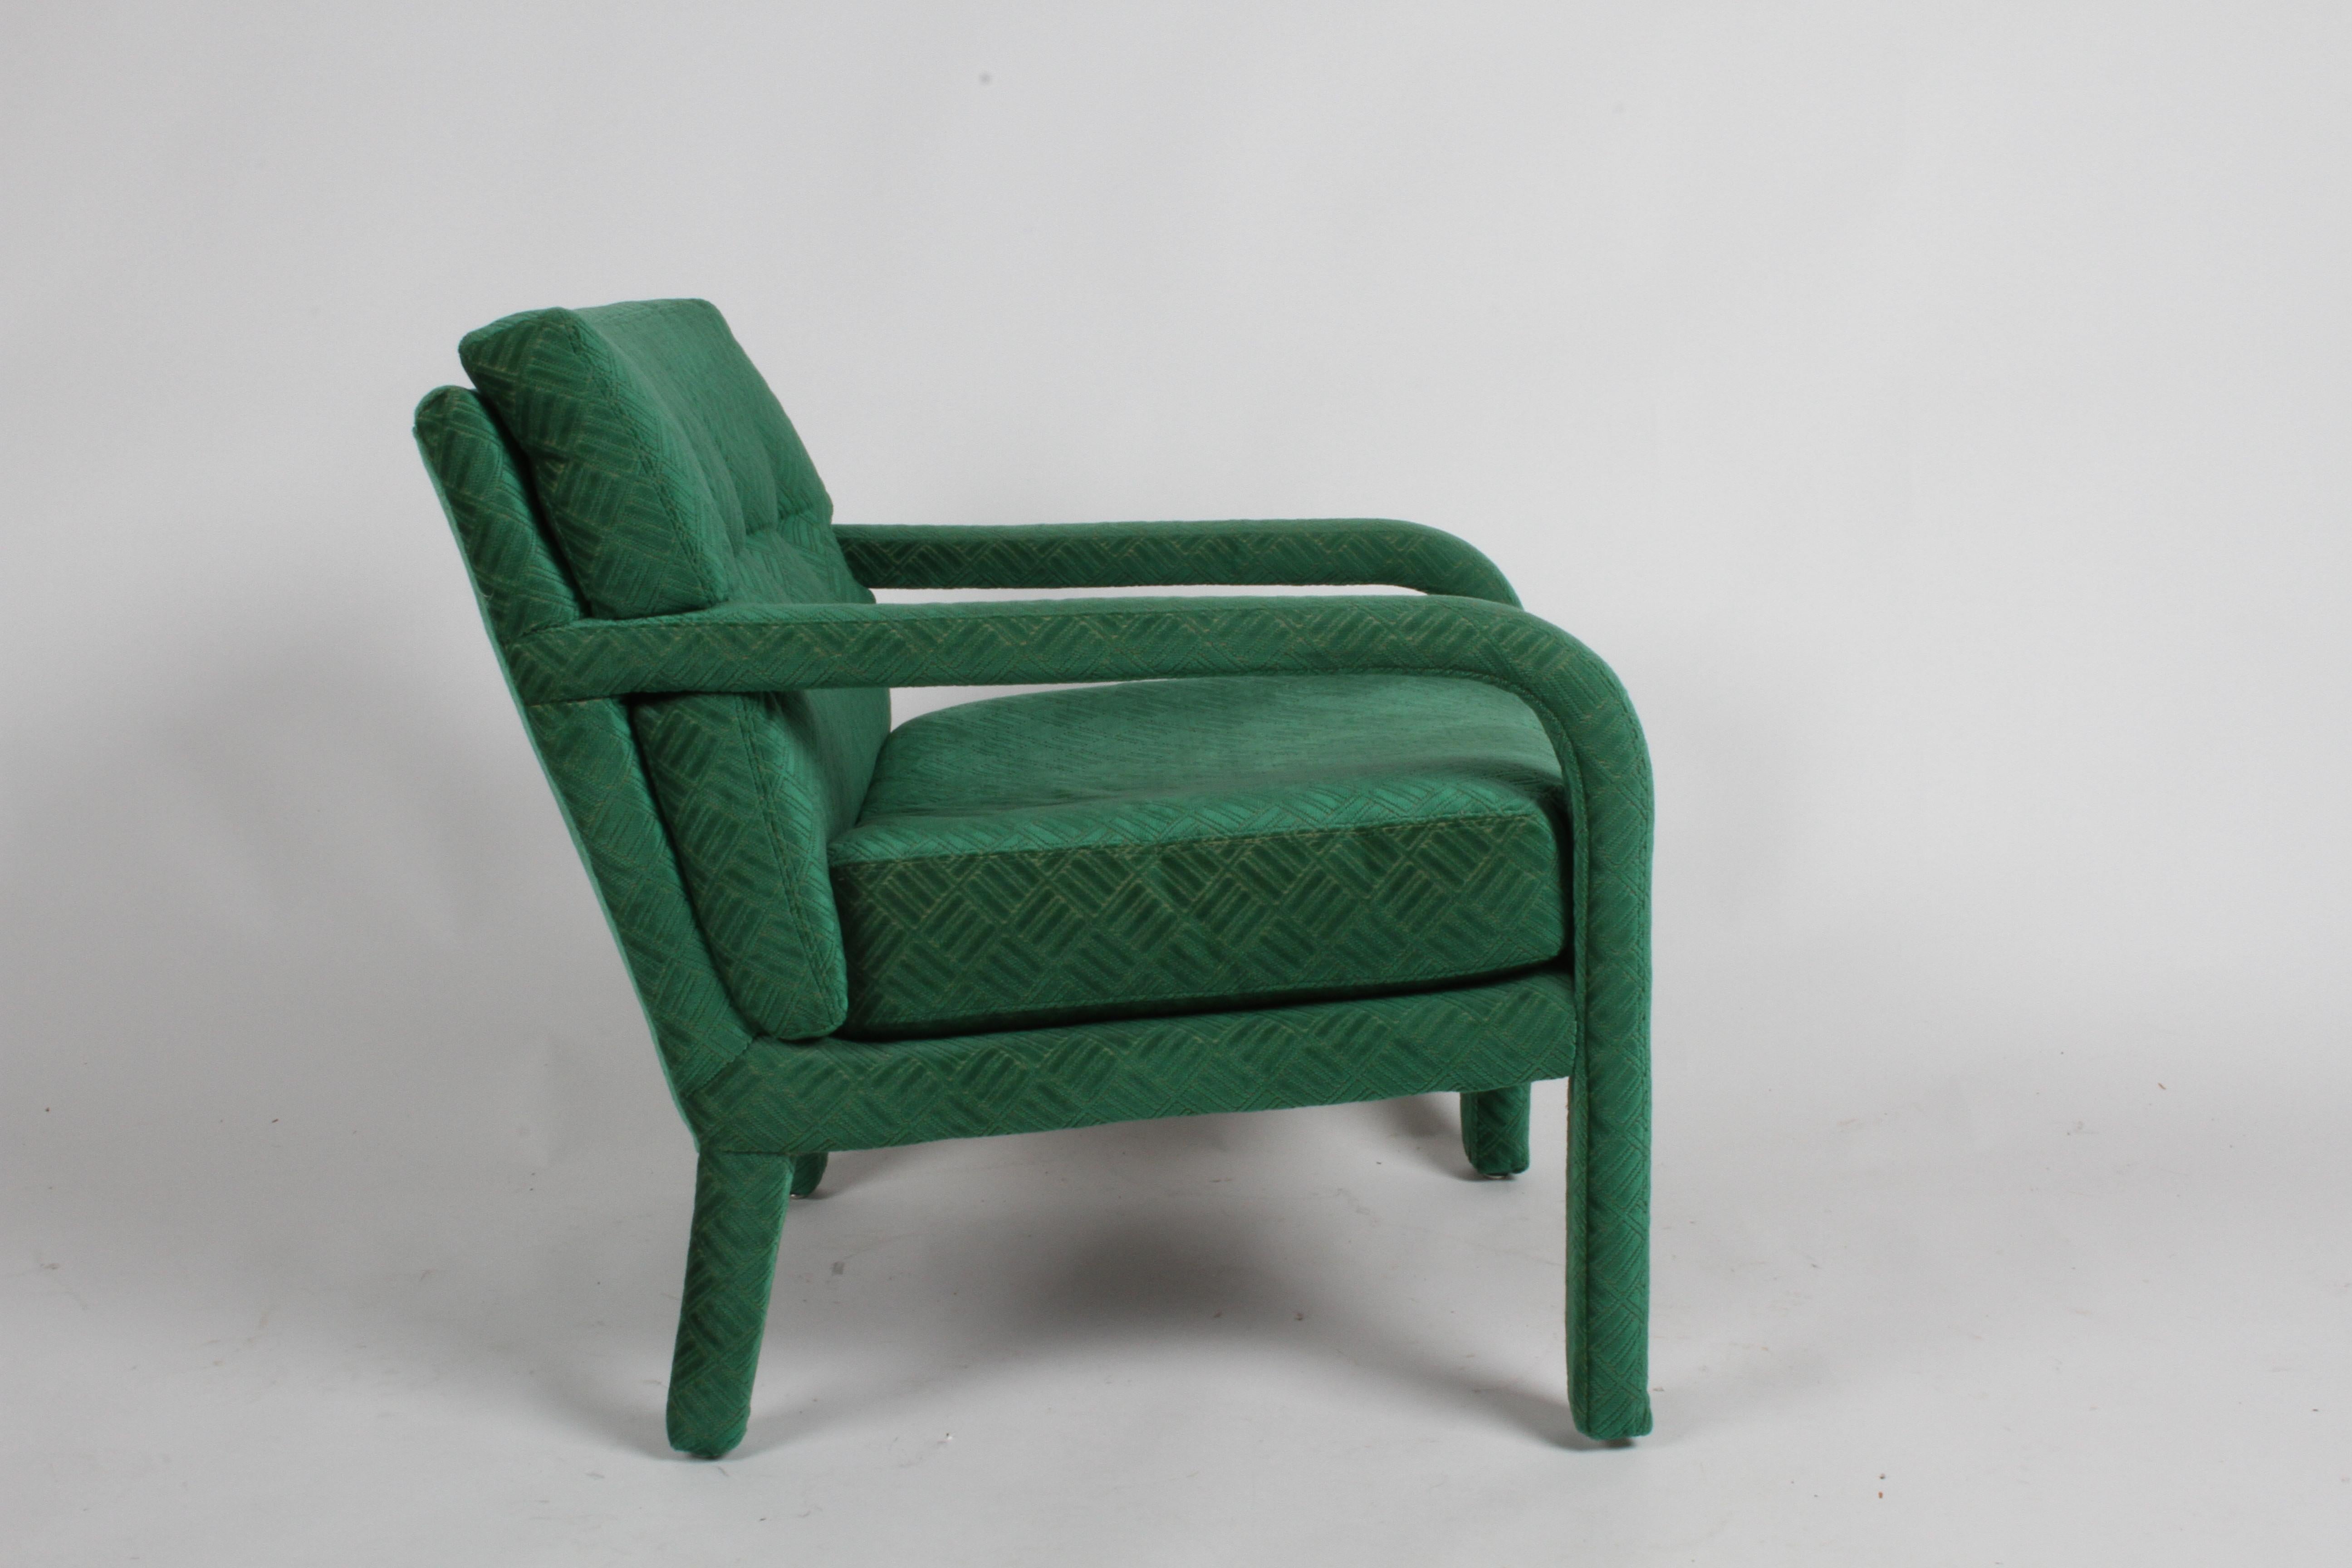 Pair of 1970s Directional Lounge Chairs in a Textured Emerald Green Upholstery 1